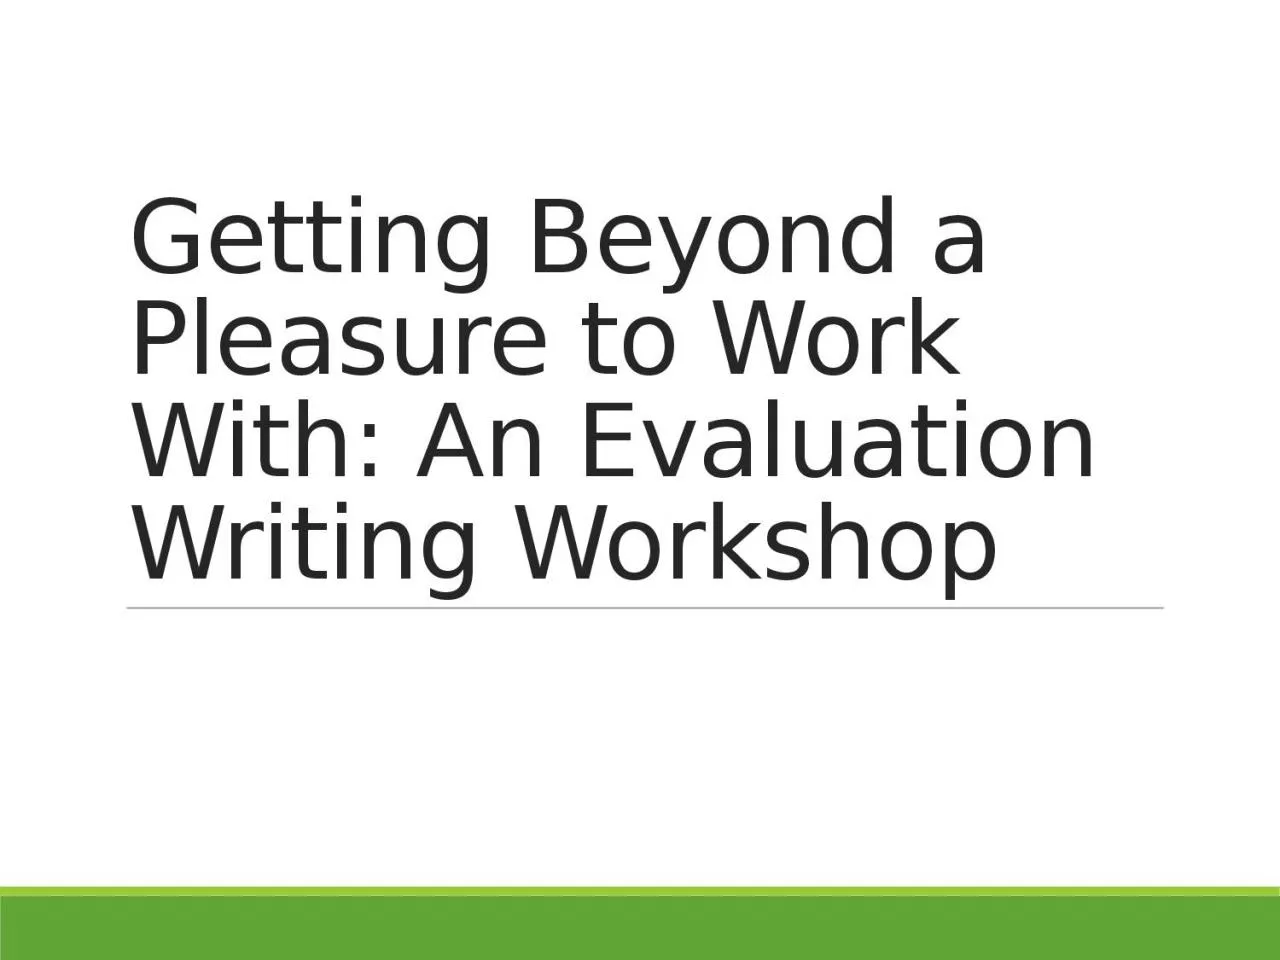 Getting Beyond a Pleasure to Work With: An Evaluation Writing Workshop